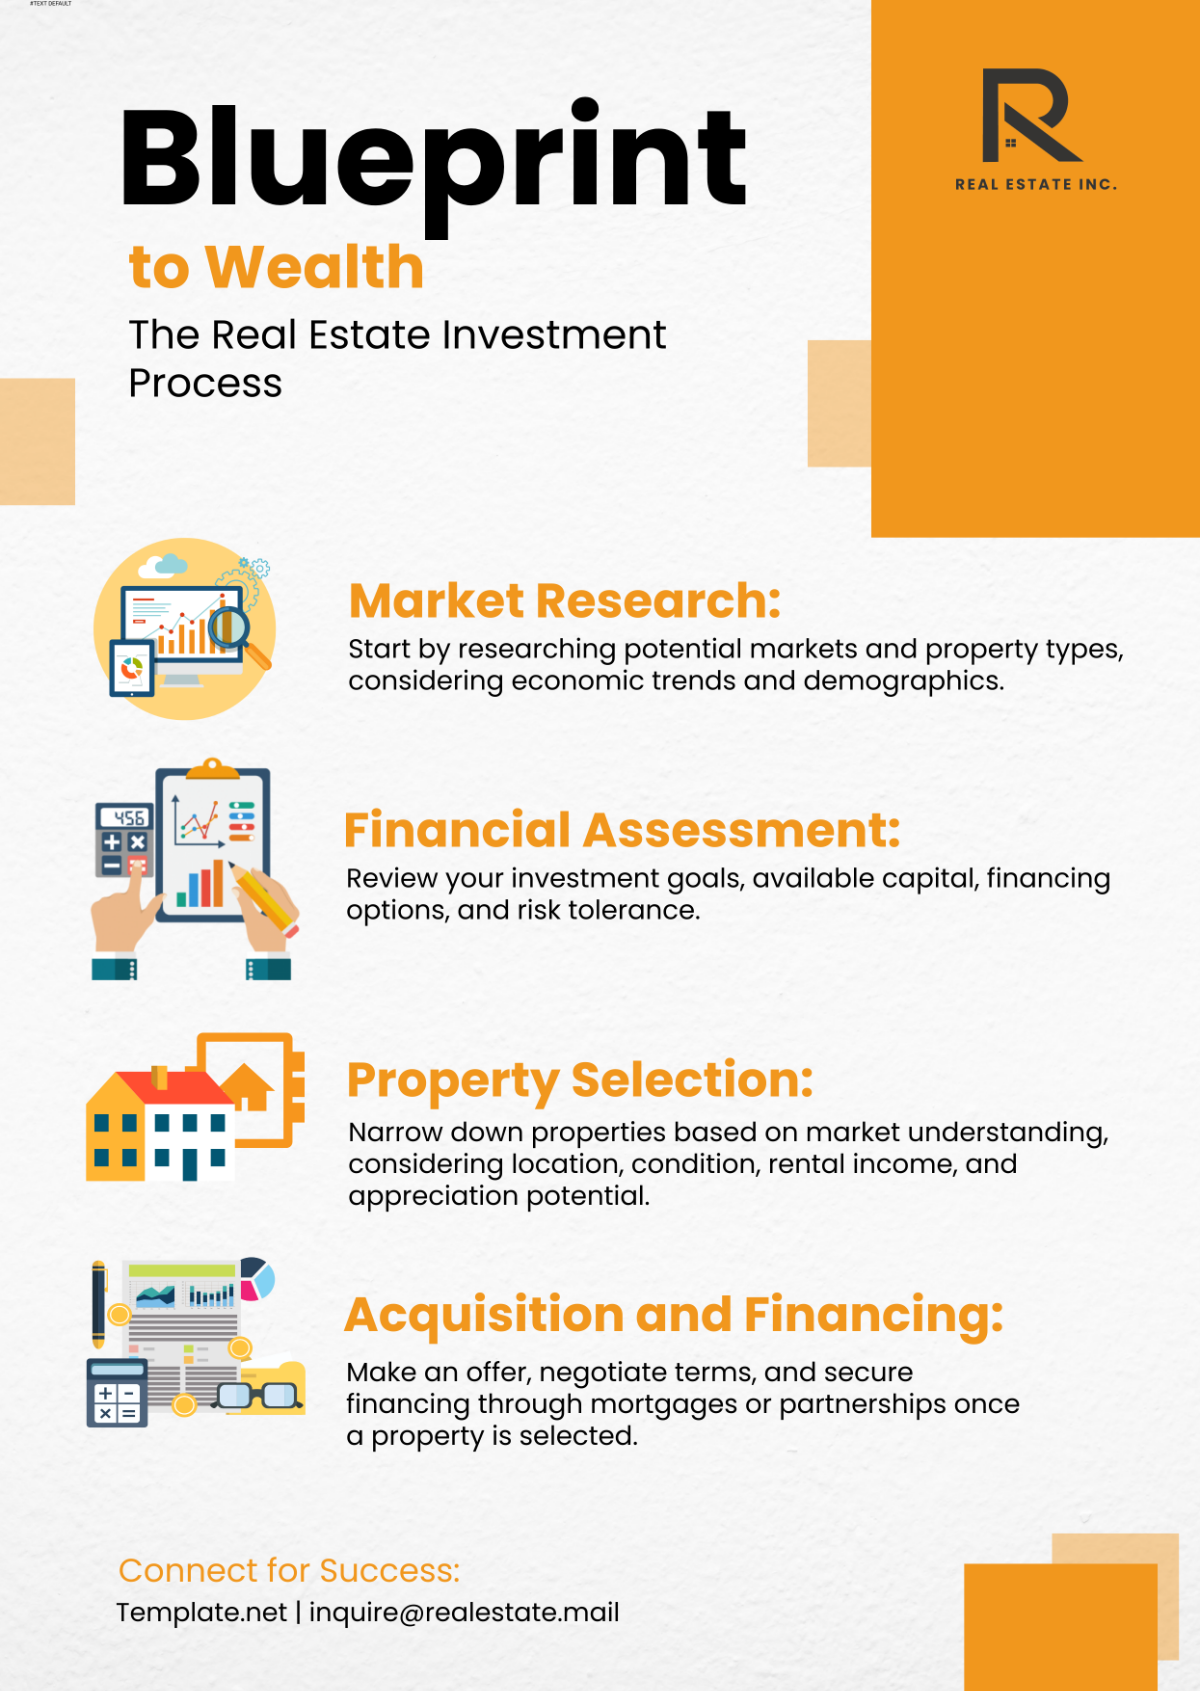 Real Estate Investment Process Infographic Template